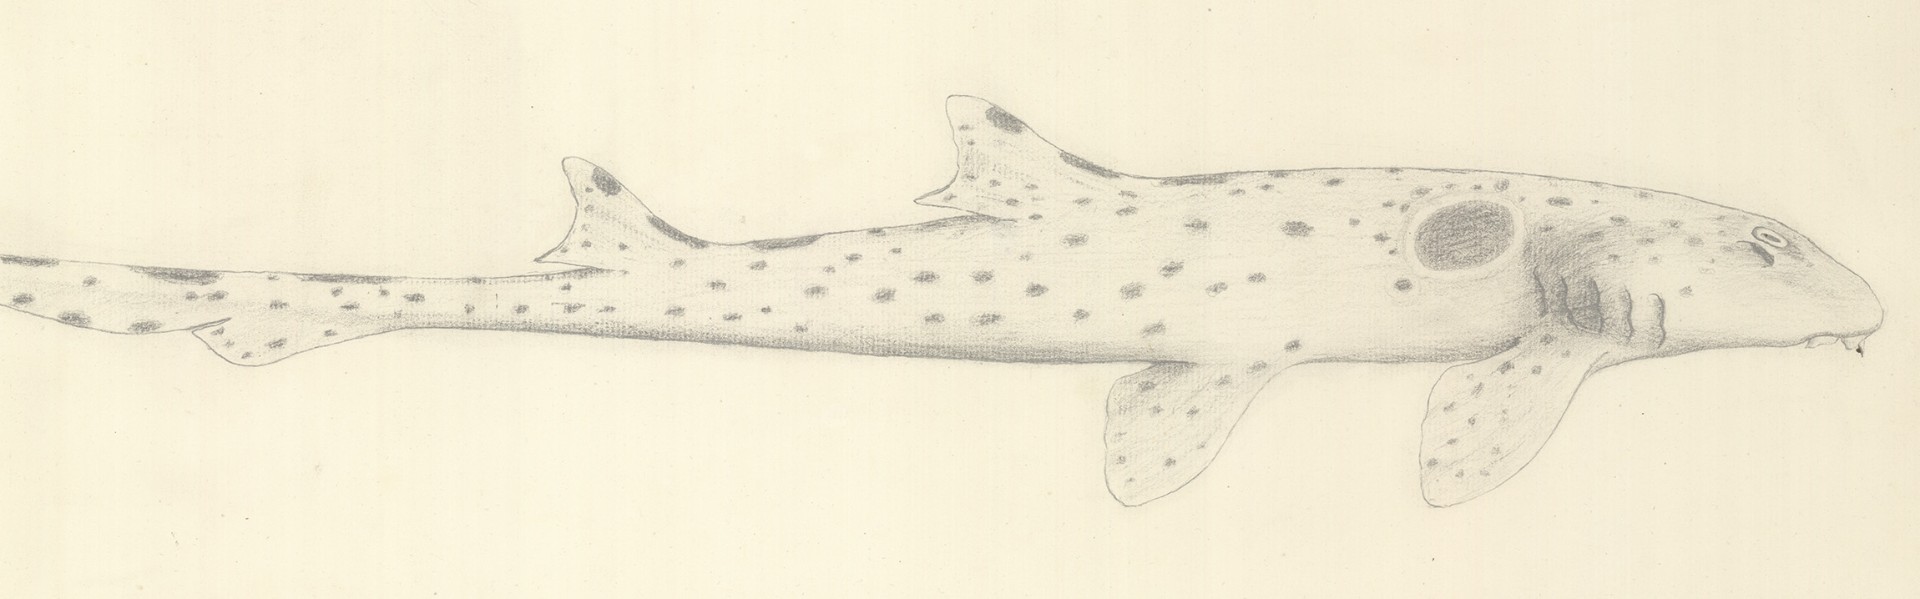 Pencil drawing of a spotted shark